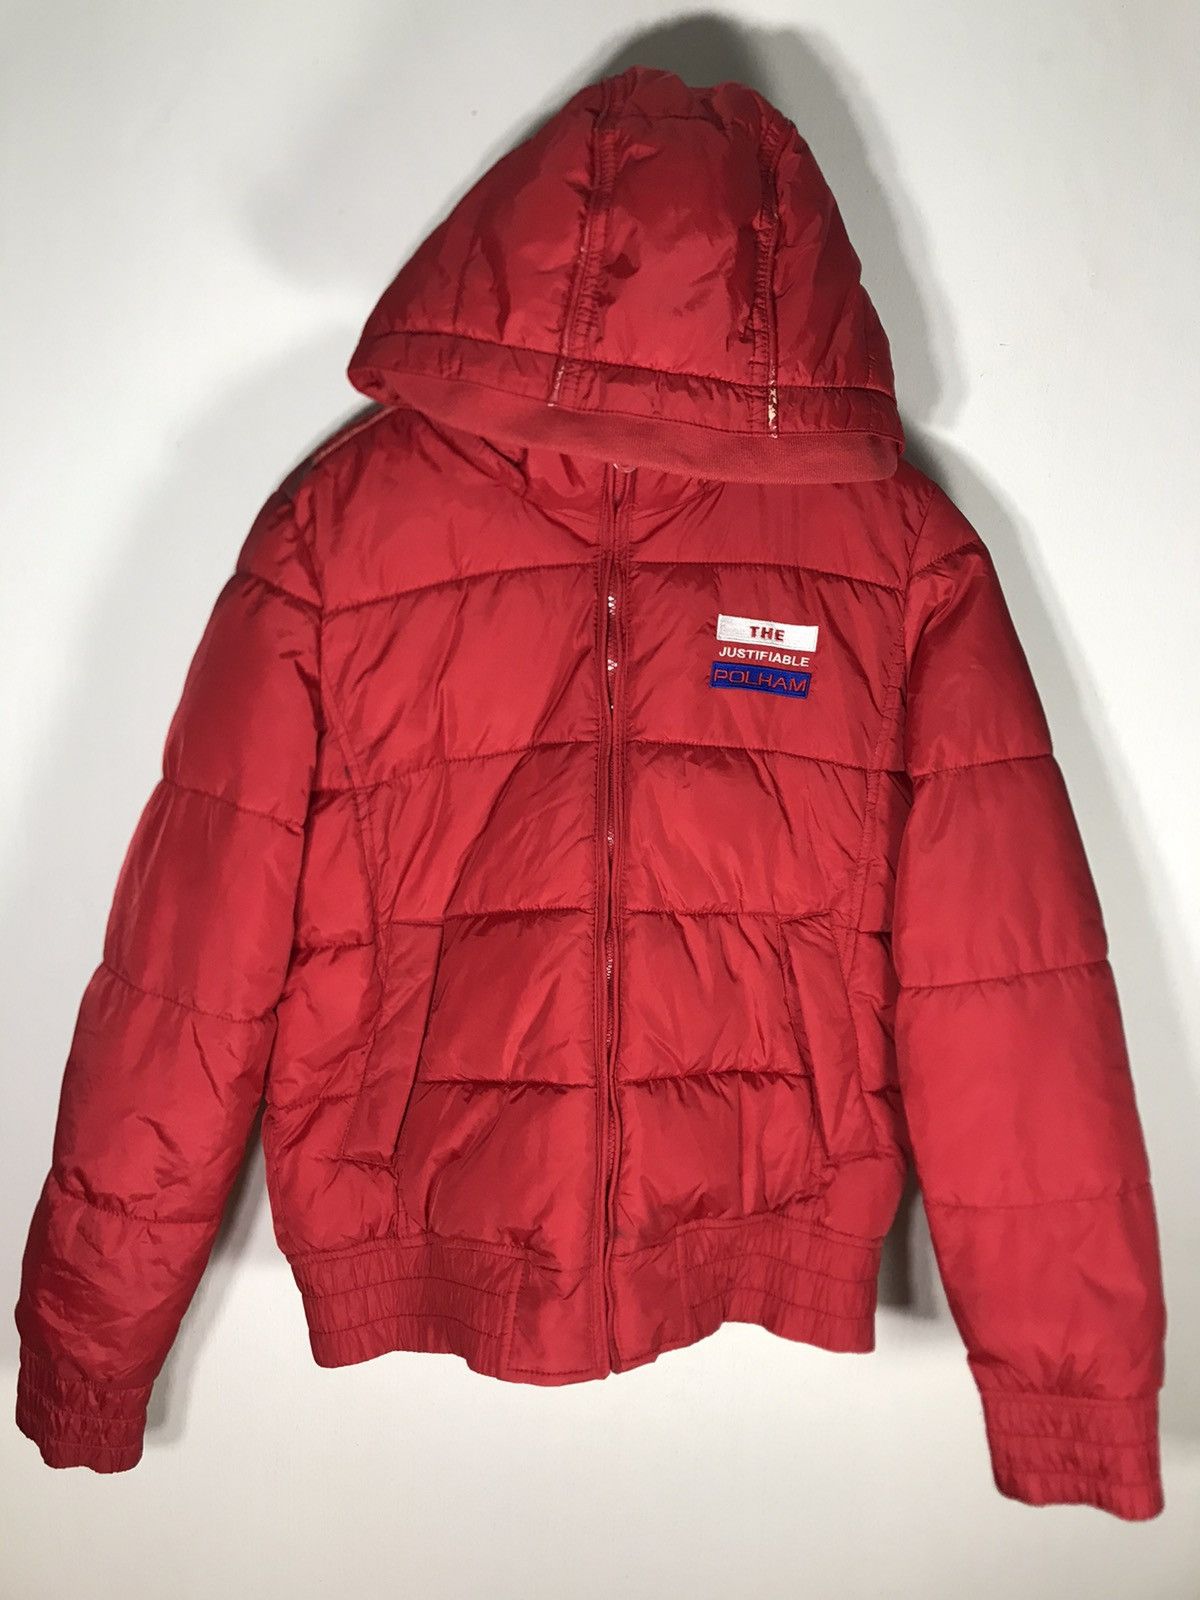 Red Jacket Polham detachable hoodie puffer jacket spell out embroidered Size US M / EU 48-50 / 2 - 3 Thumbnail